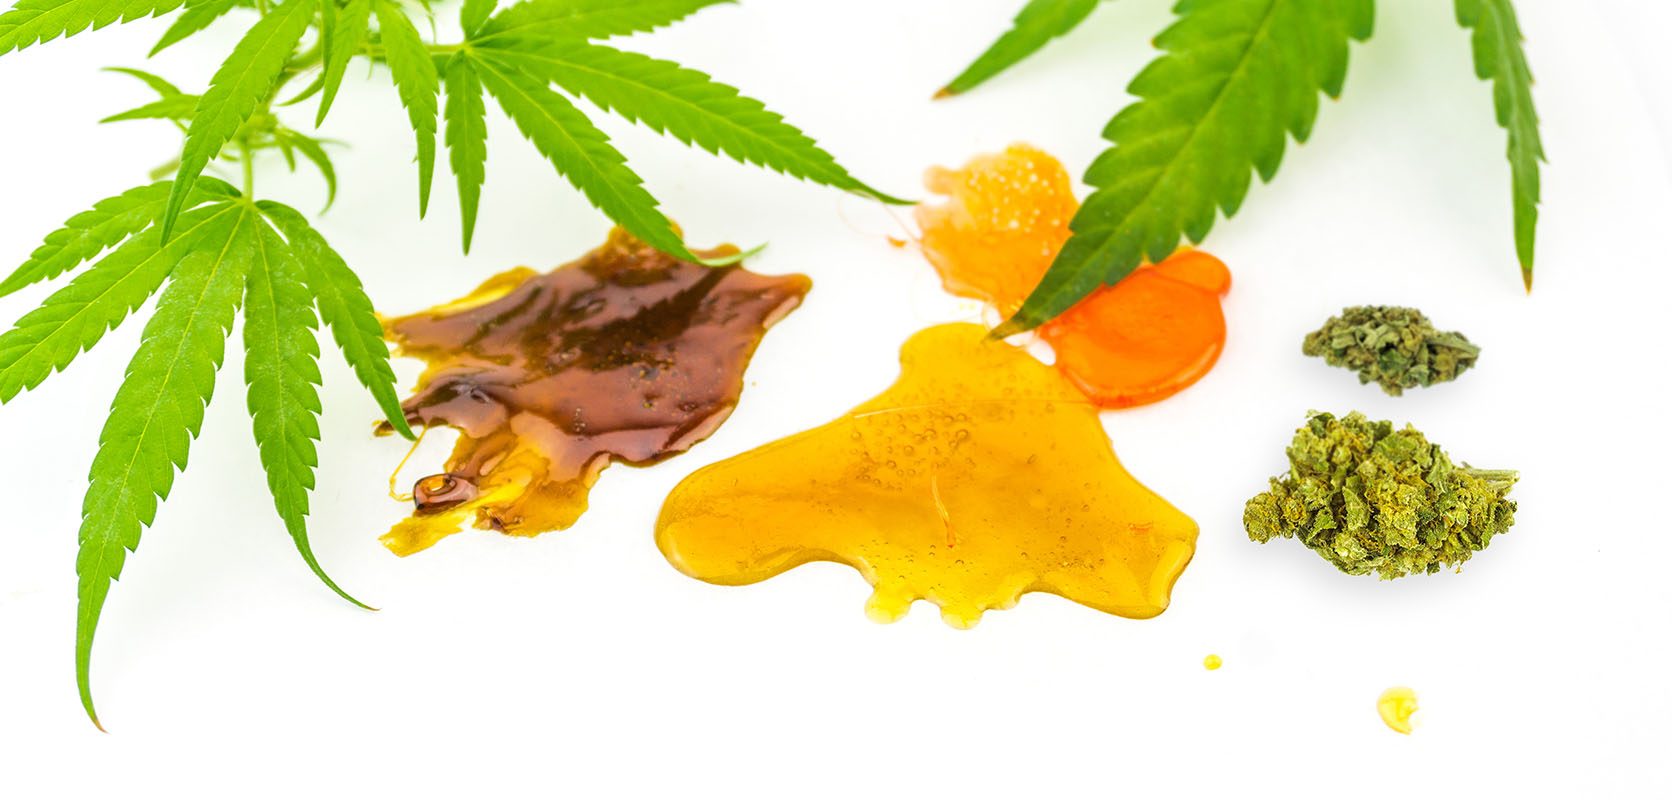 image of cannabis leaves and THC concentrates